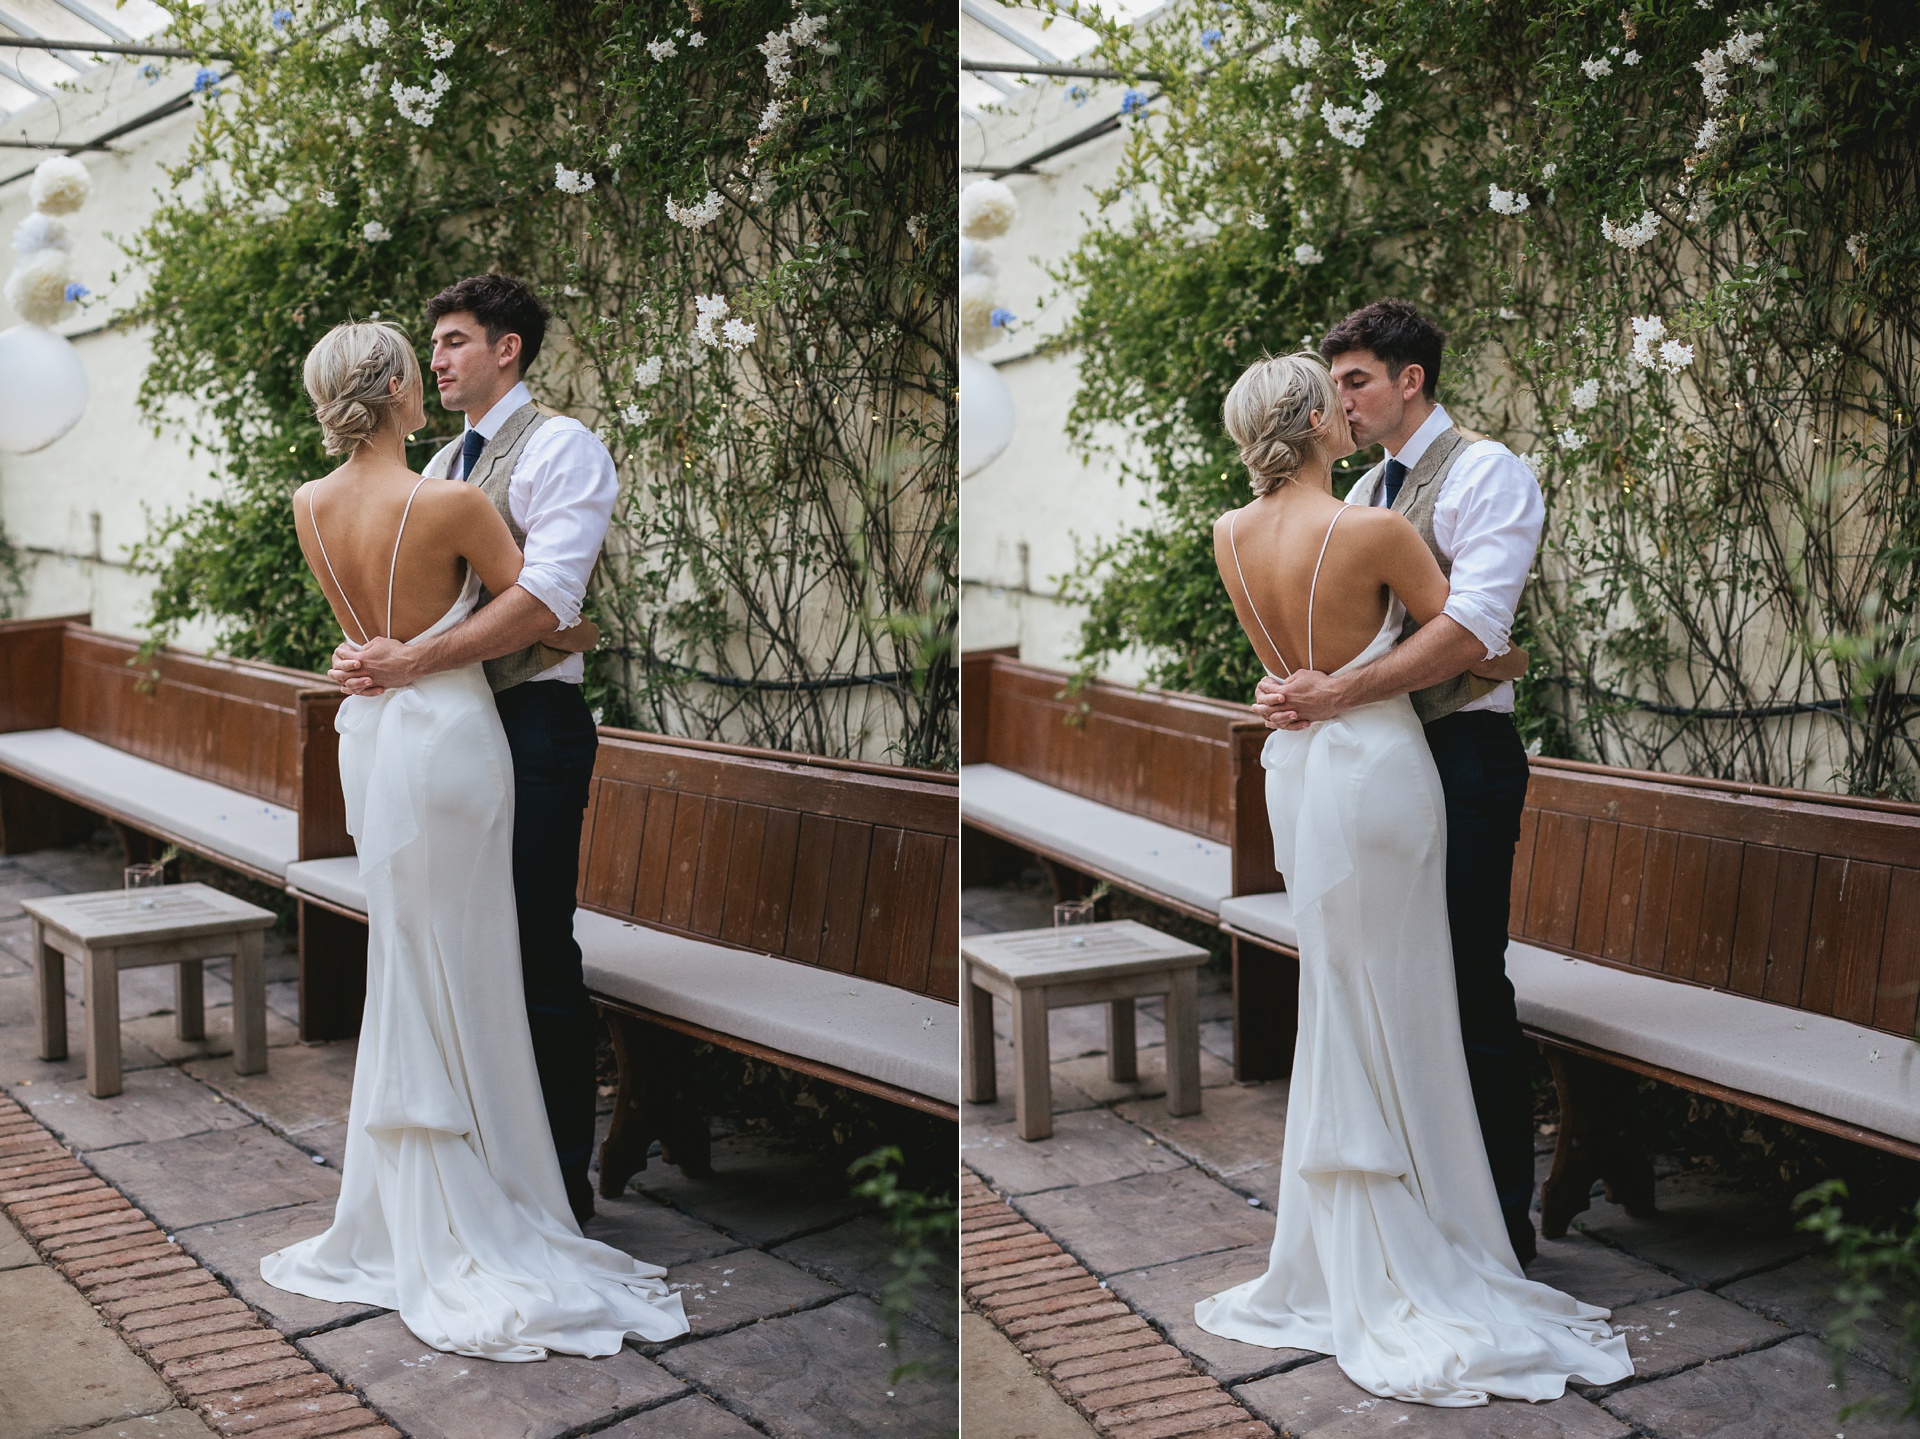 Groom holding bride with backless dress